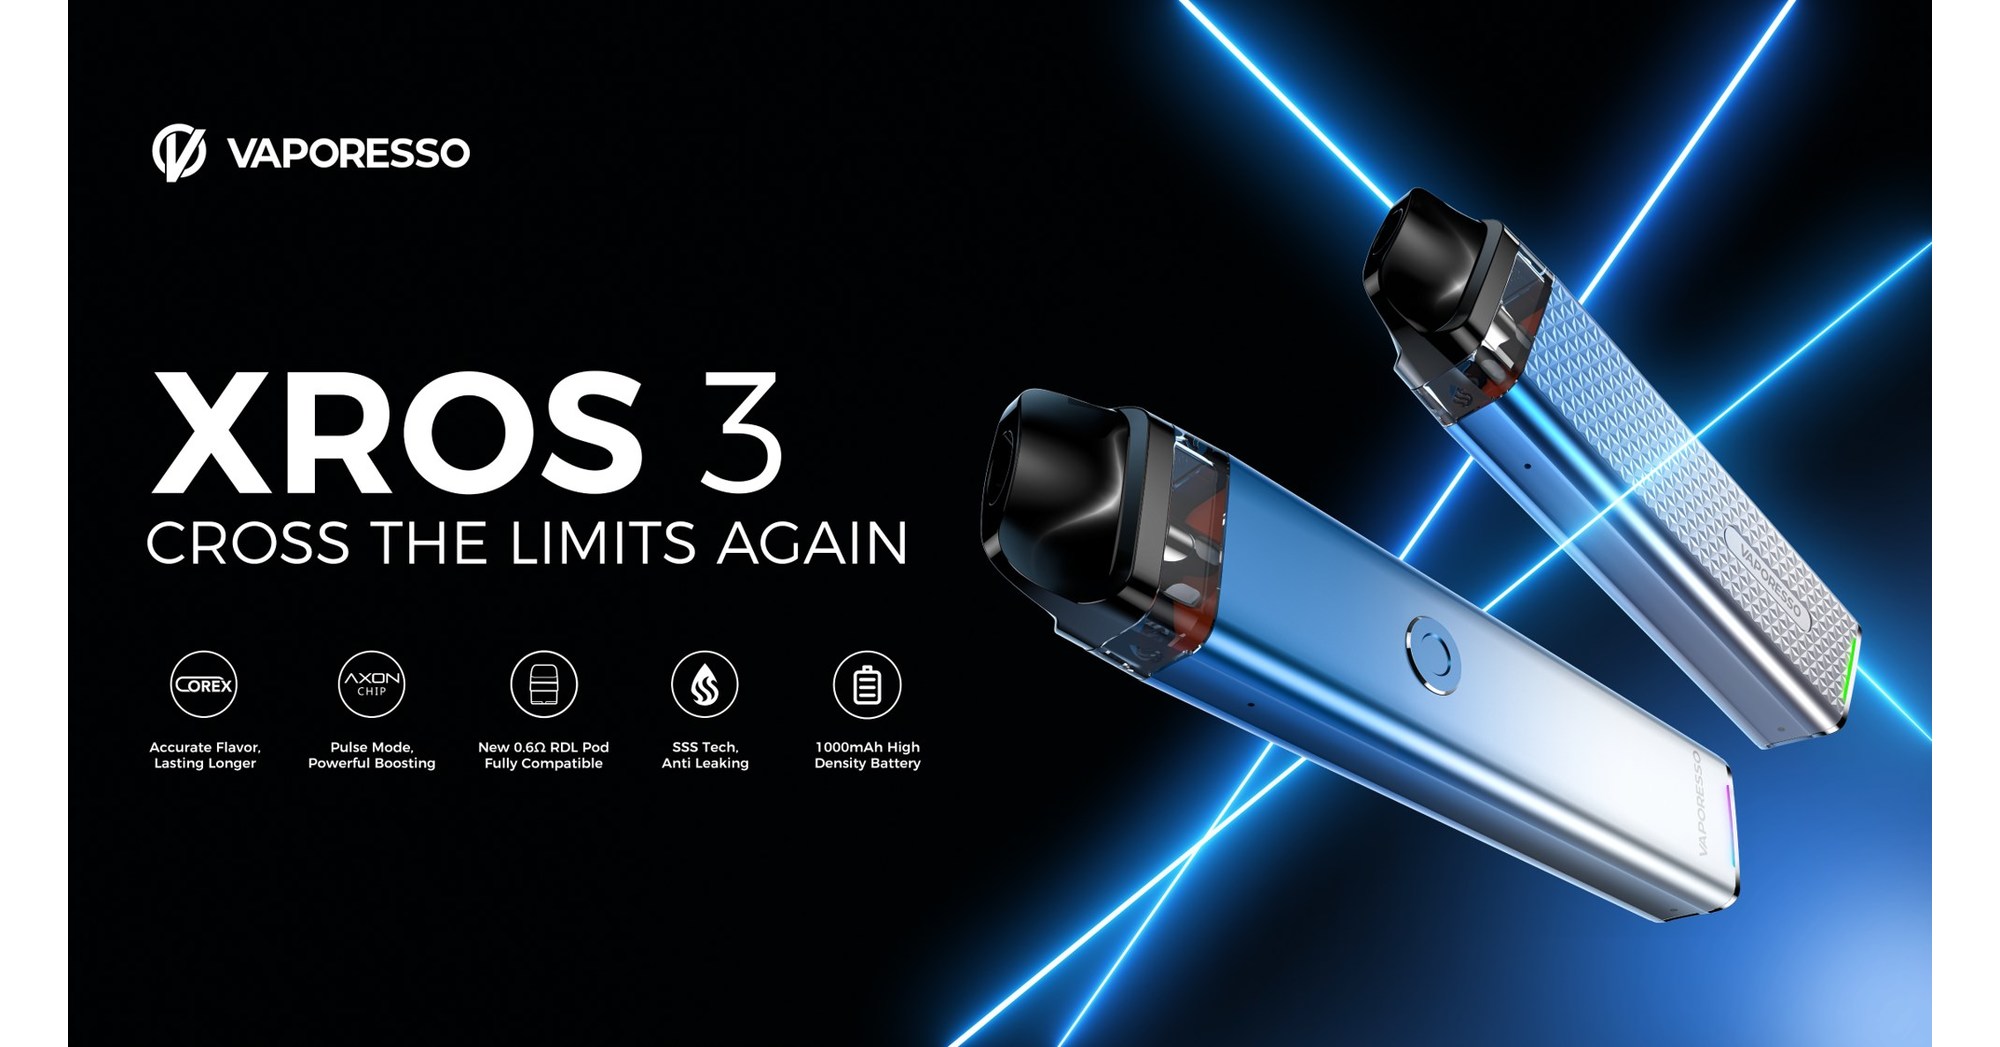 VAPORESSO Readies XROS 3 for Early December Release